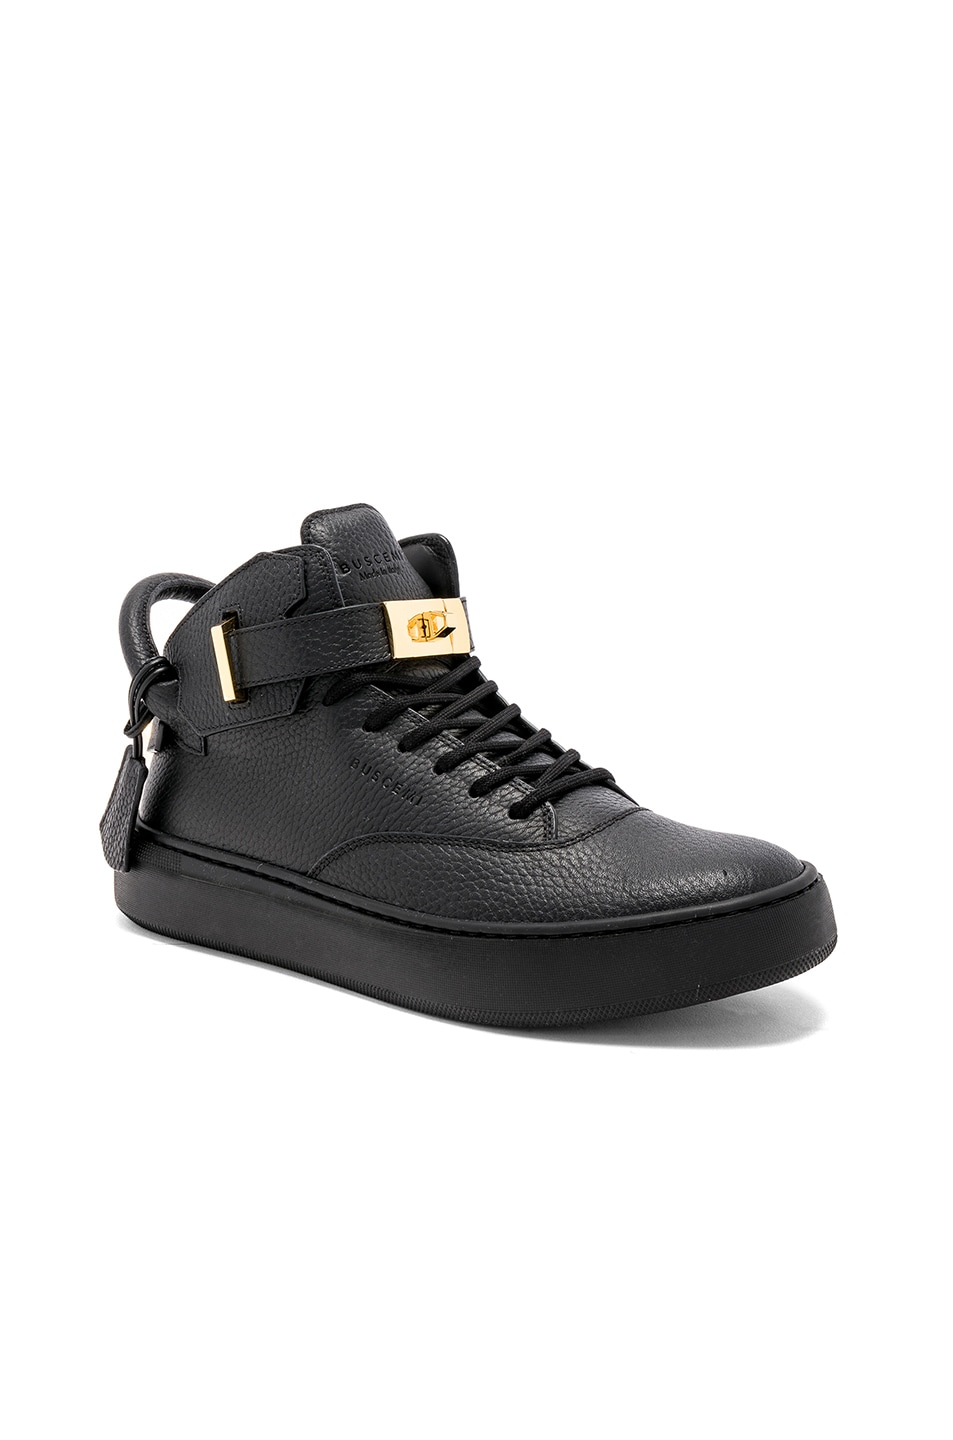 Buscemi 100MM Leather Mid Alce Sneakers in Black | FWRD